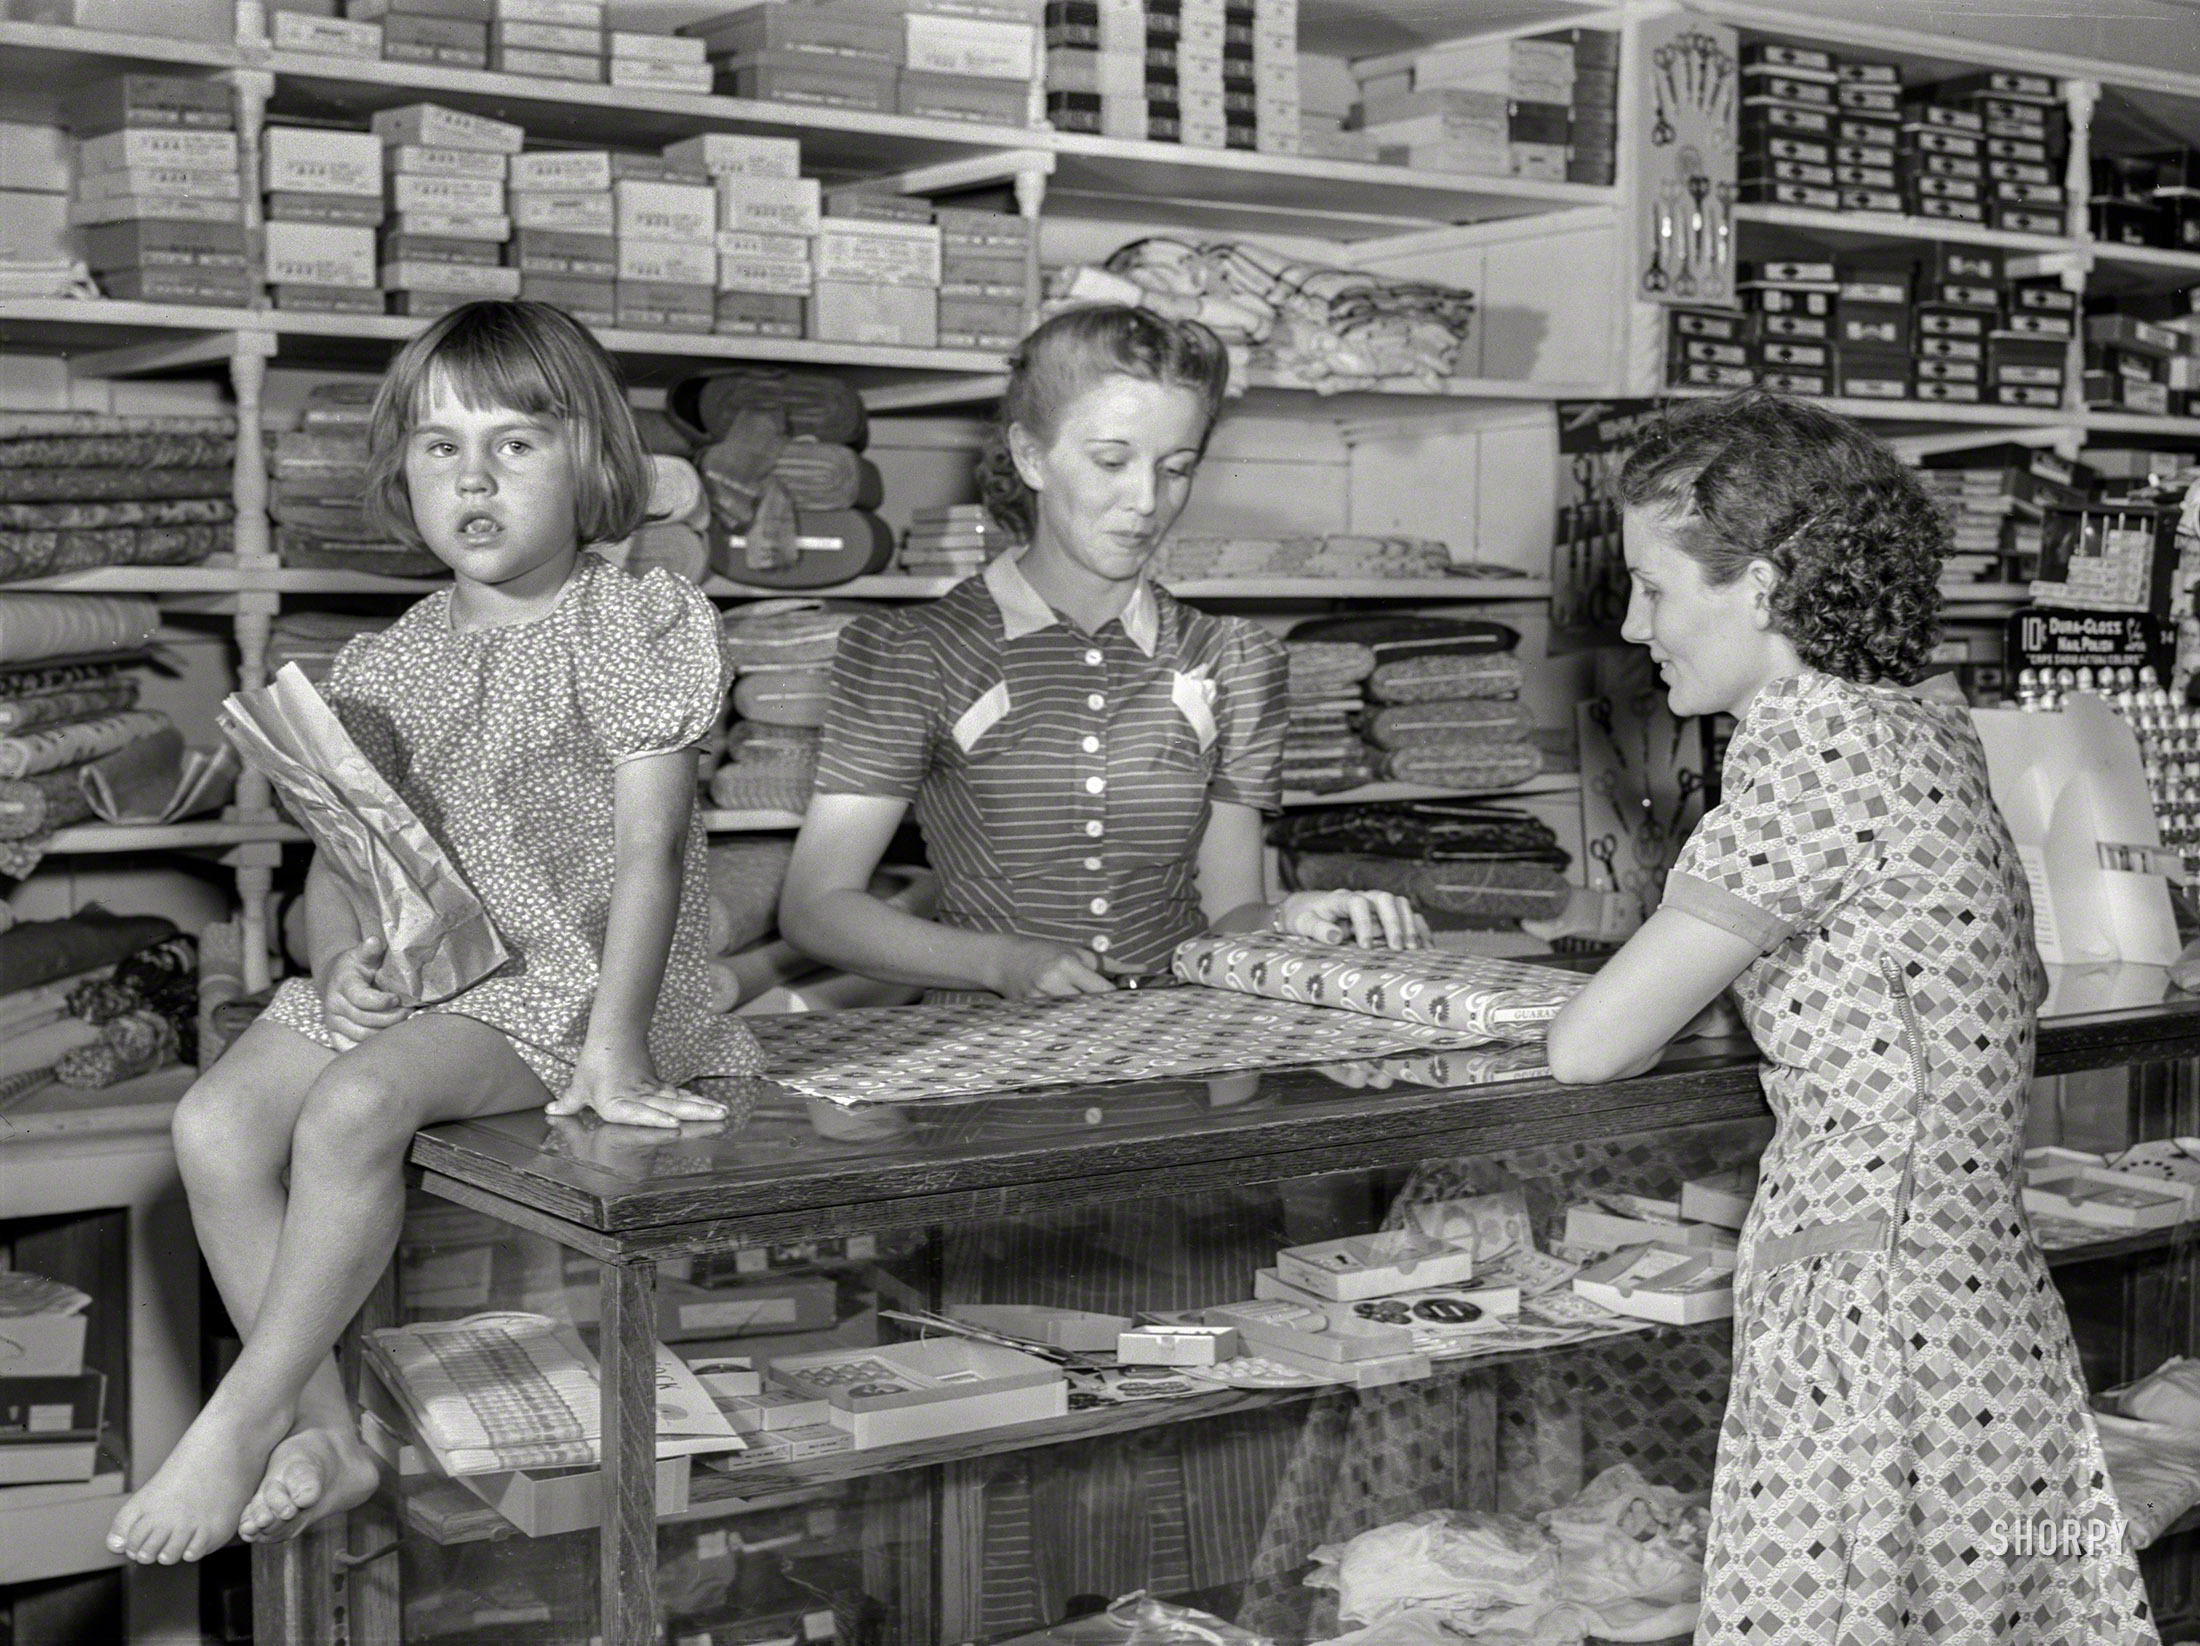 June 1940. "Buying dress goods in project cooperative store. Transylvania Resettlement Project, Louisiana." Medium acetate format negative by Marion Post Wolcott for the Farm Security Administration. View full size.